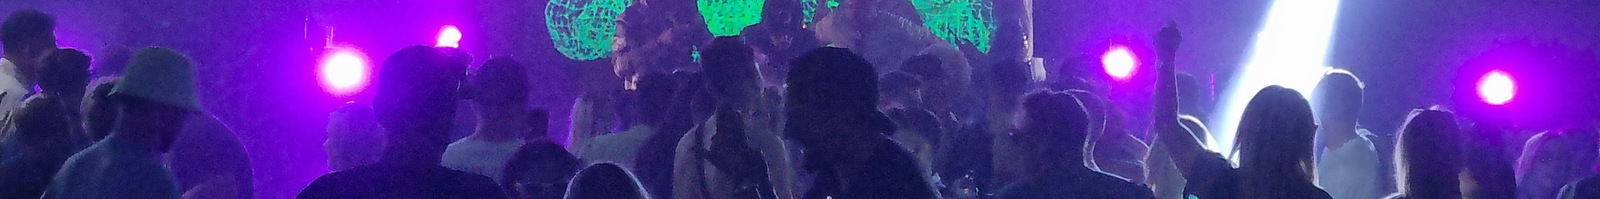 Thin header image of a crowd partying